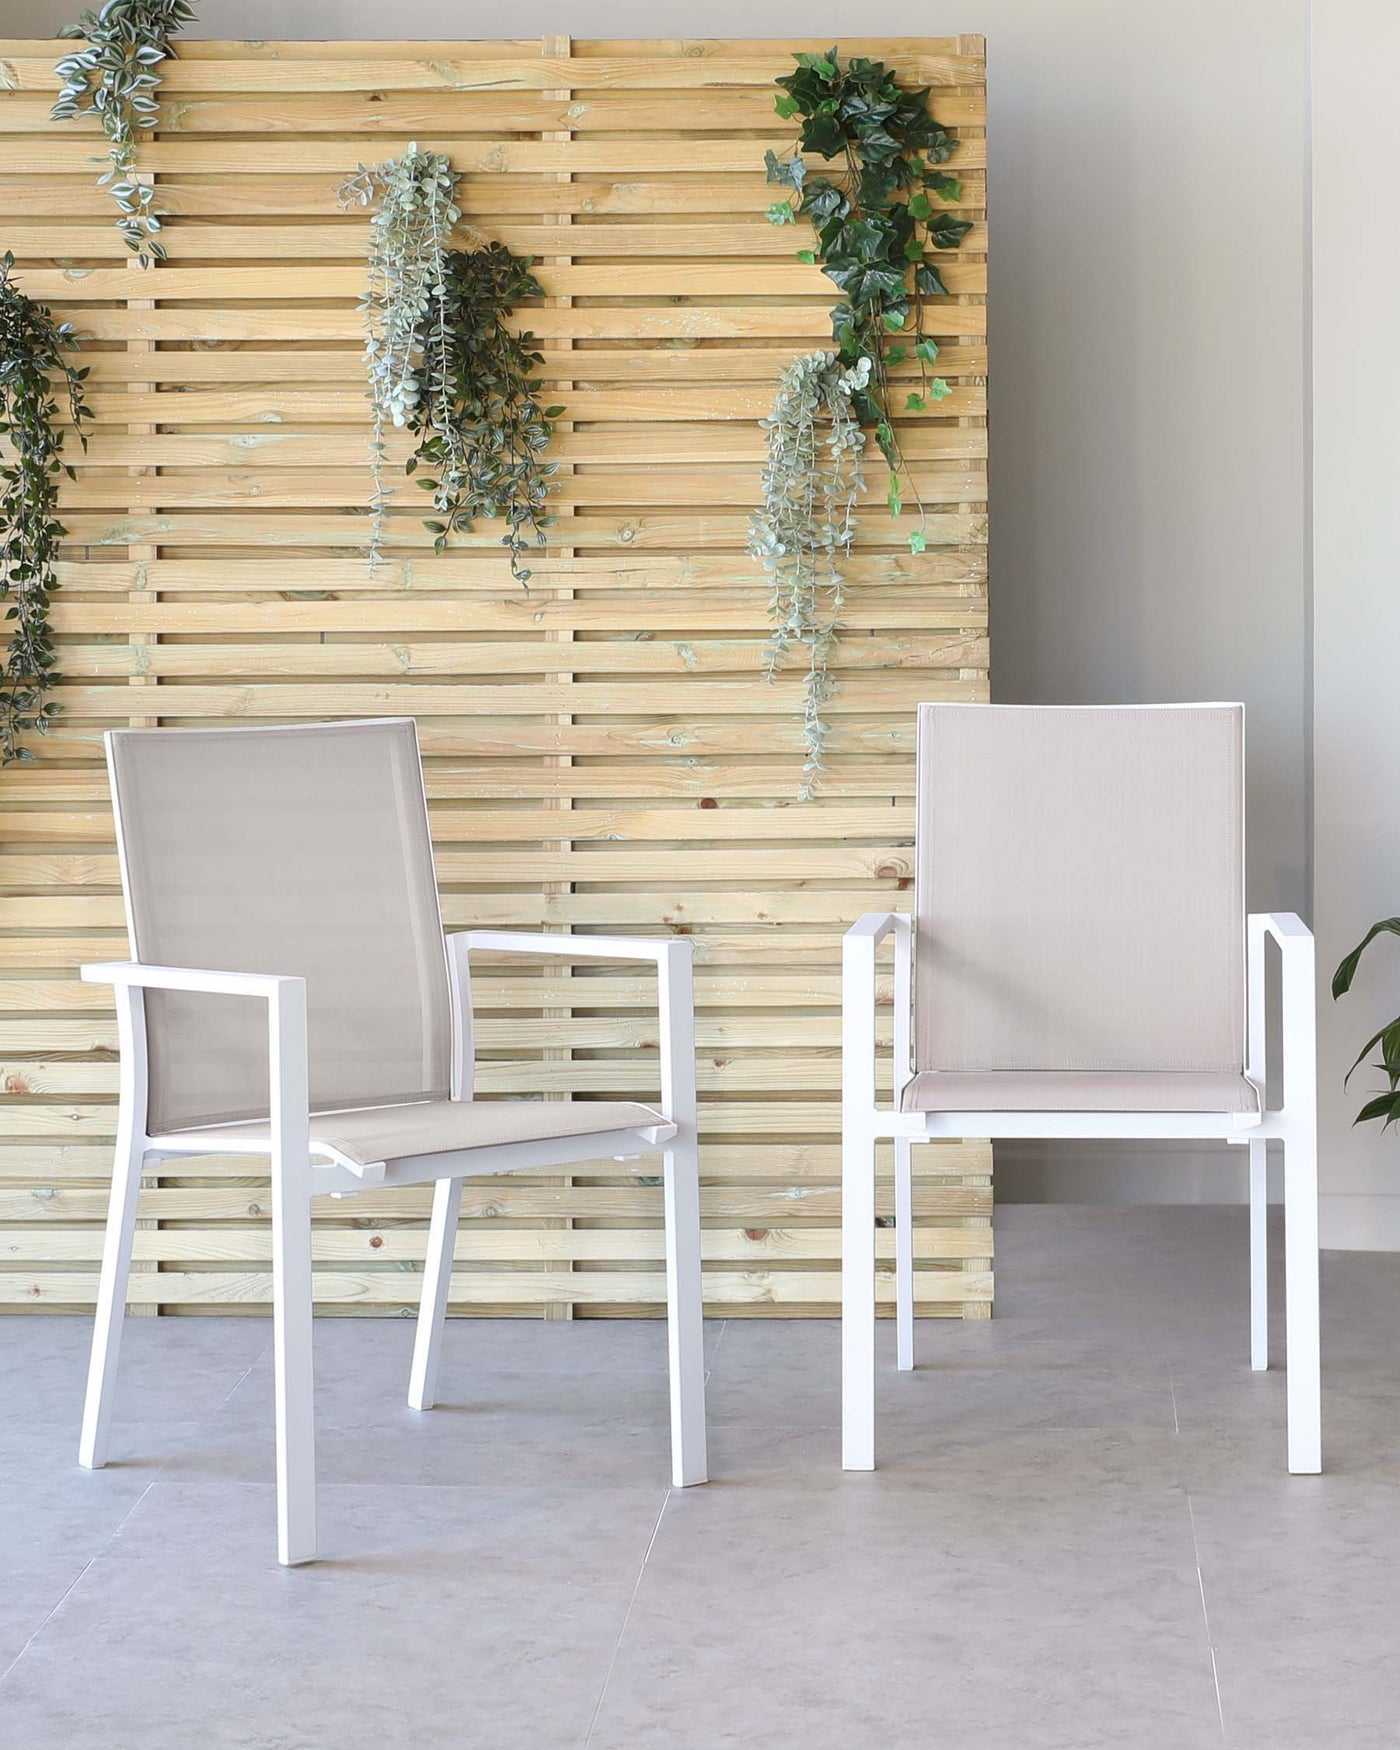 Two modern outdoor chairs with white metal frames and light taupe fabric seats and backs, set against a wooden slatted wall with hanging green plants.